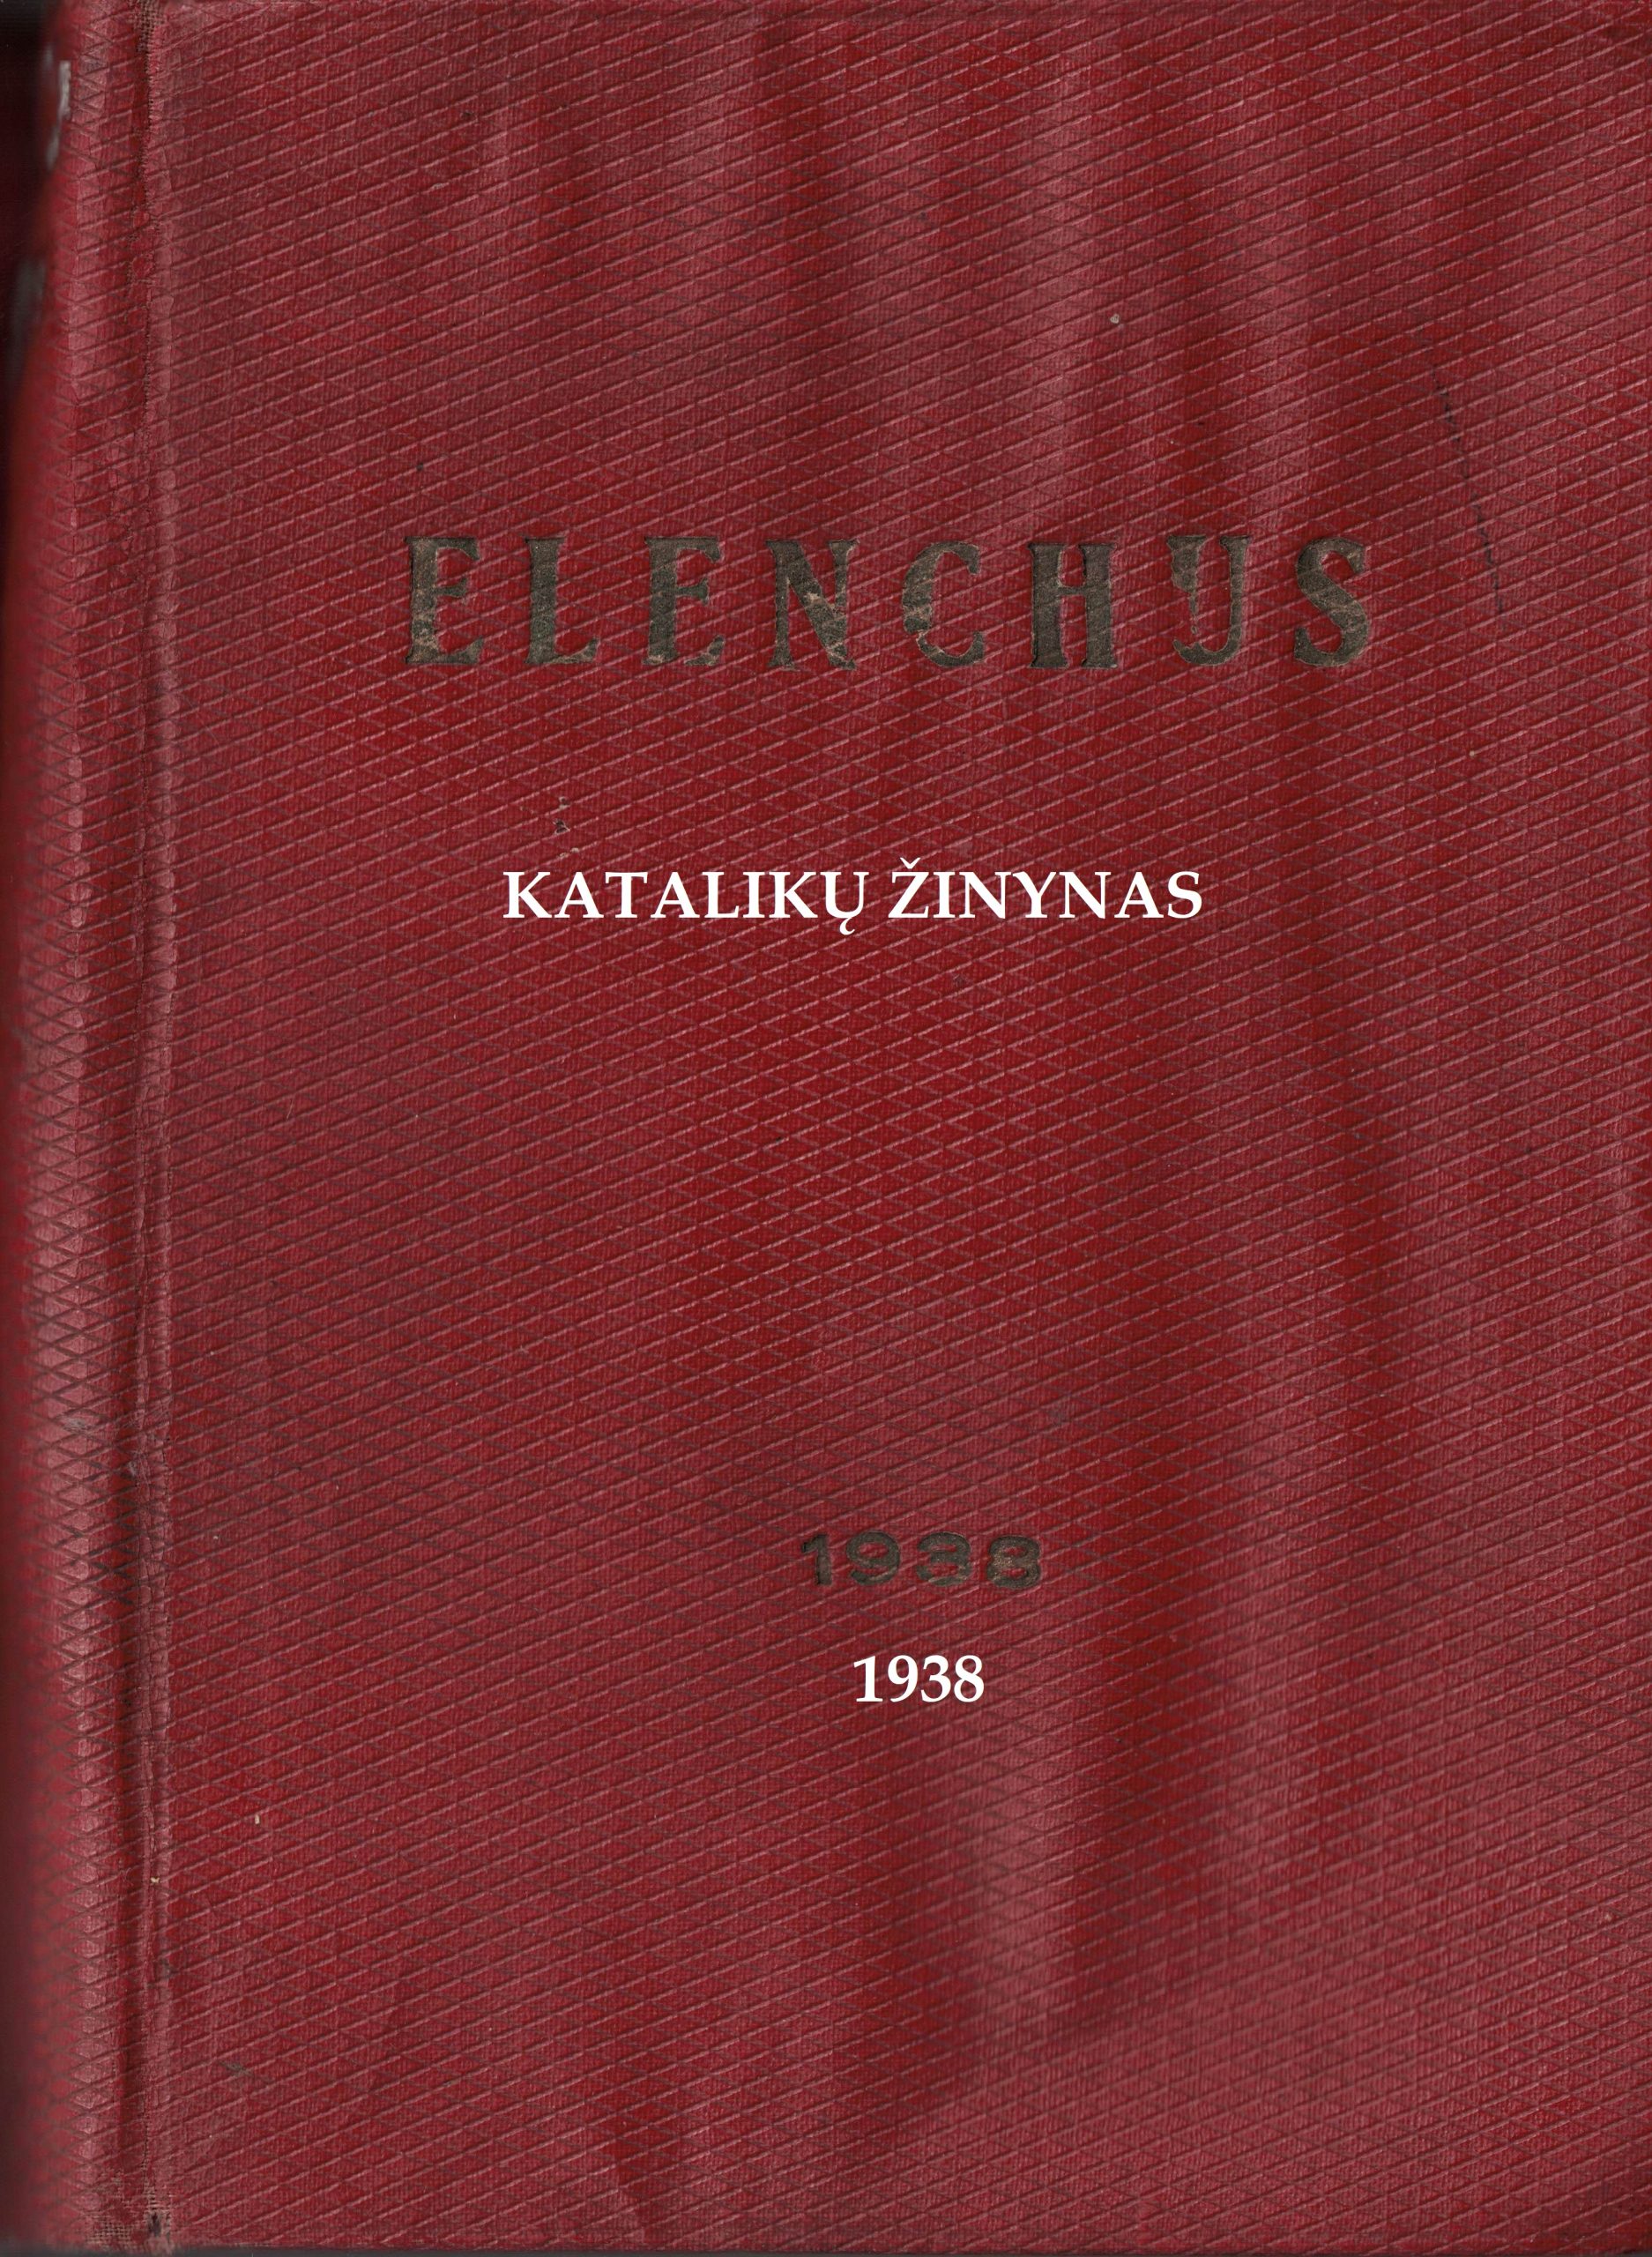 You are currently viewing Katalikų žinynas (Elenchus), 1938 m.